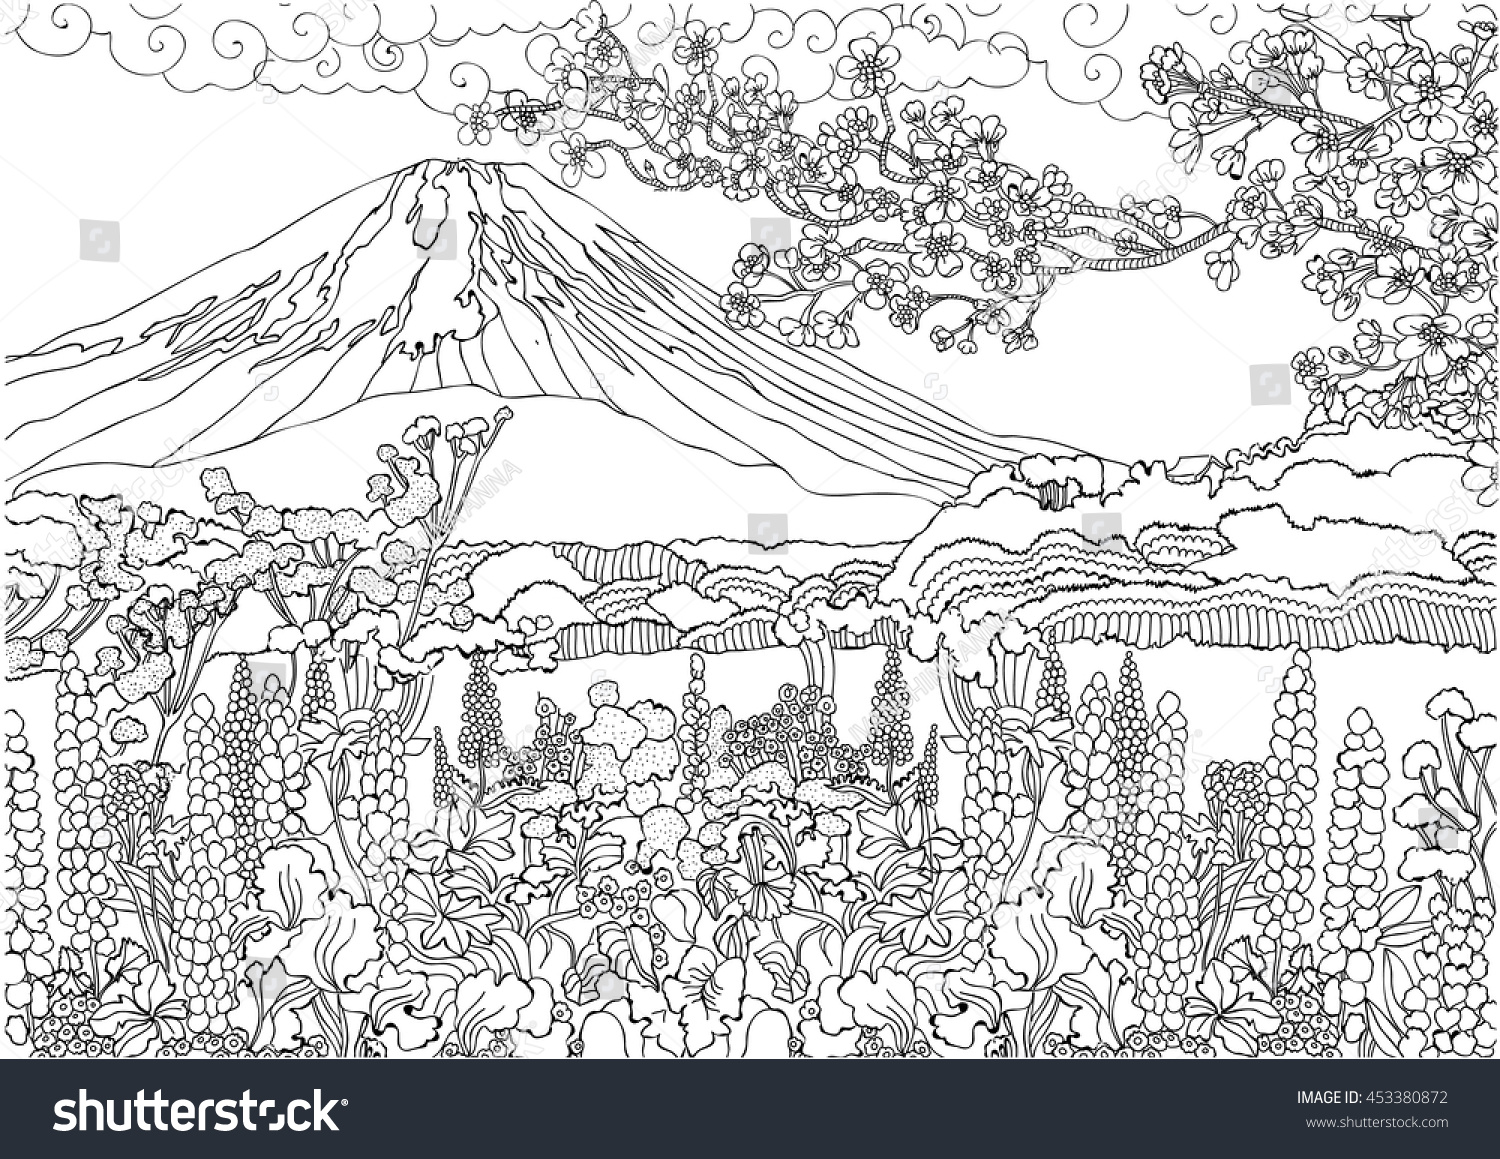 Mountain Japan Fujiyama Landscape Coloring Pages Stock Vector ...